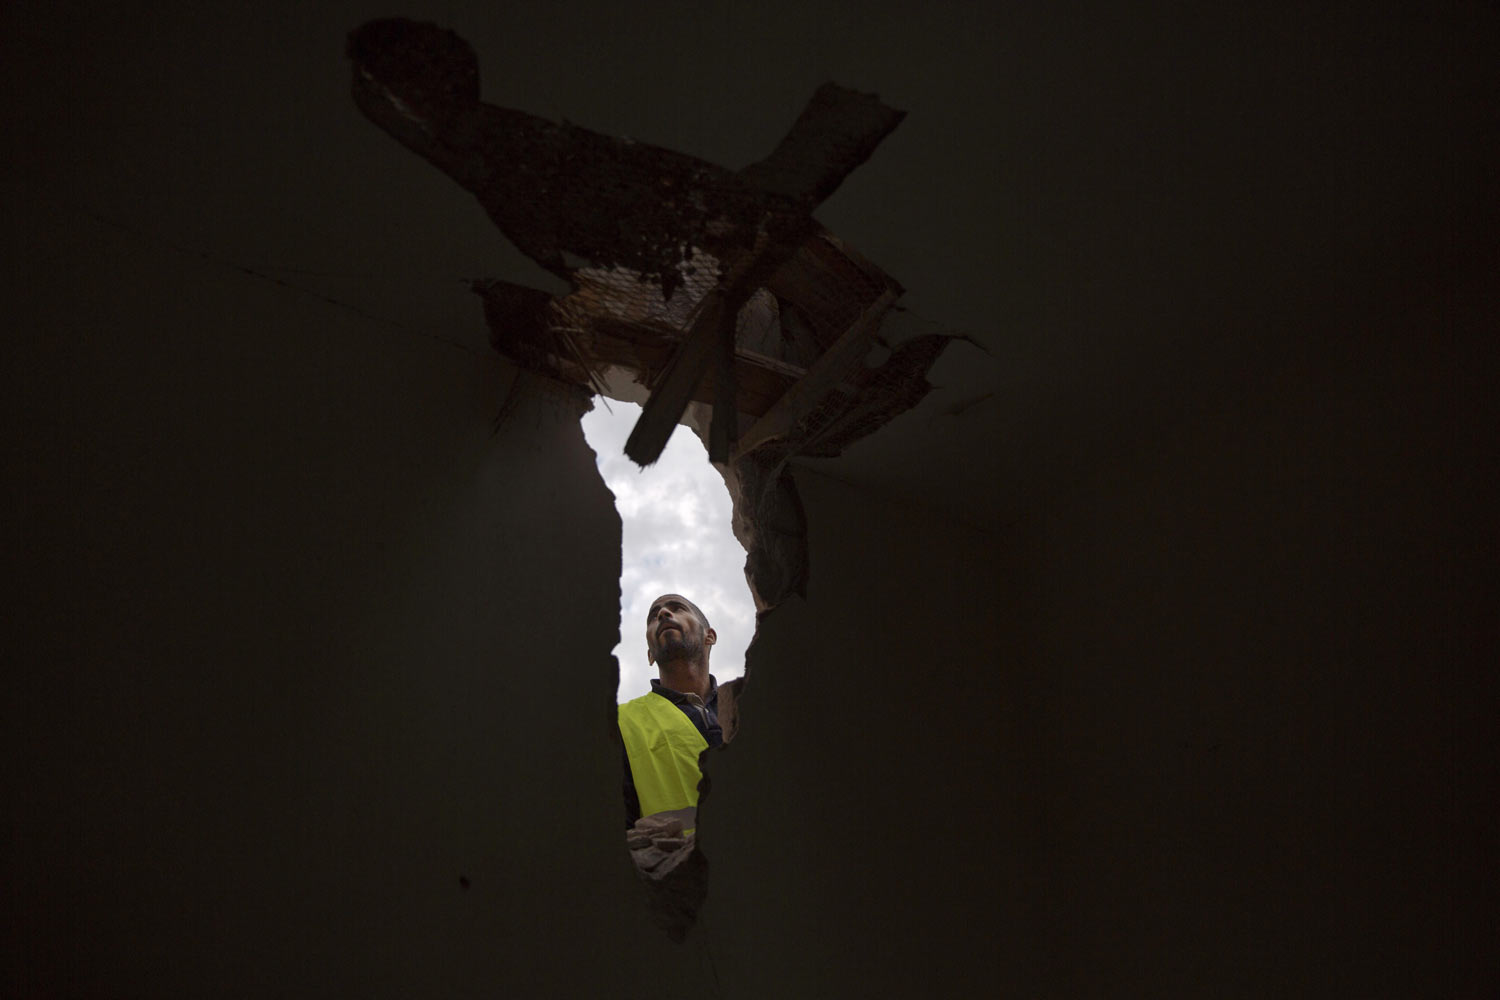  A man examines damage to a house after it was hit by a rocket on Monday in Sderot, southern Israel, Tuesday, March 26, 2019. Israel and Gaza's Hamas militants traded fire overnight after a rocket attack from Gaza struck a home in central Israel Mond